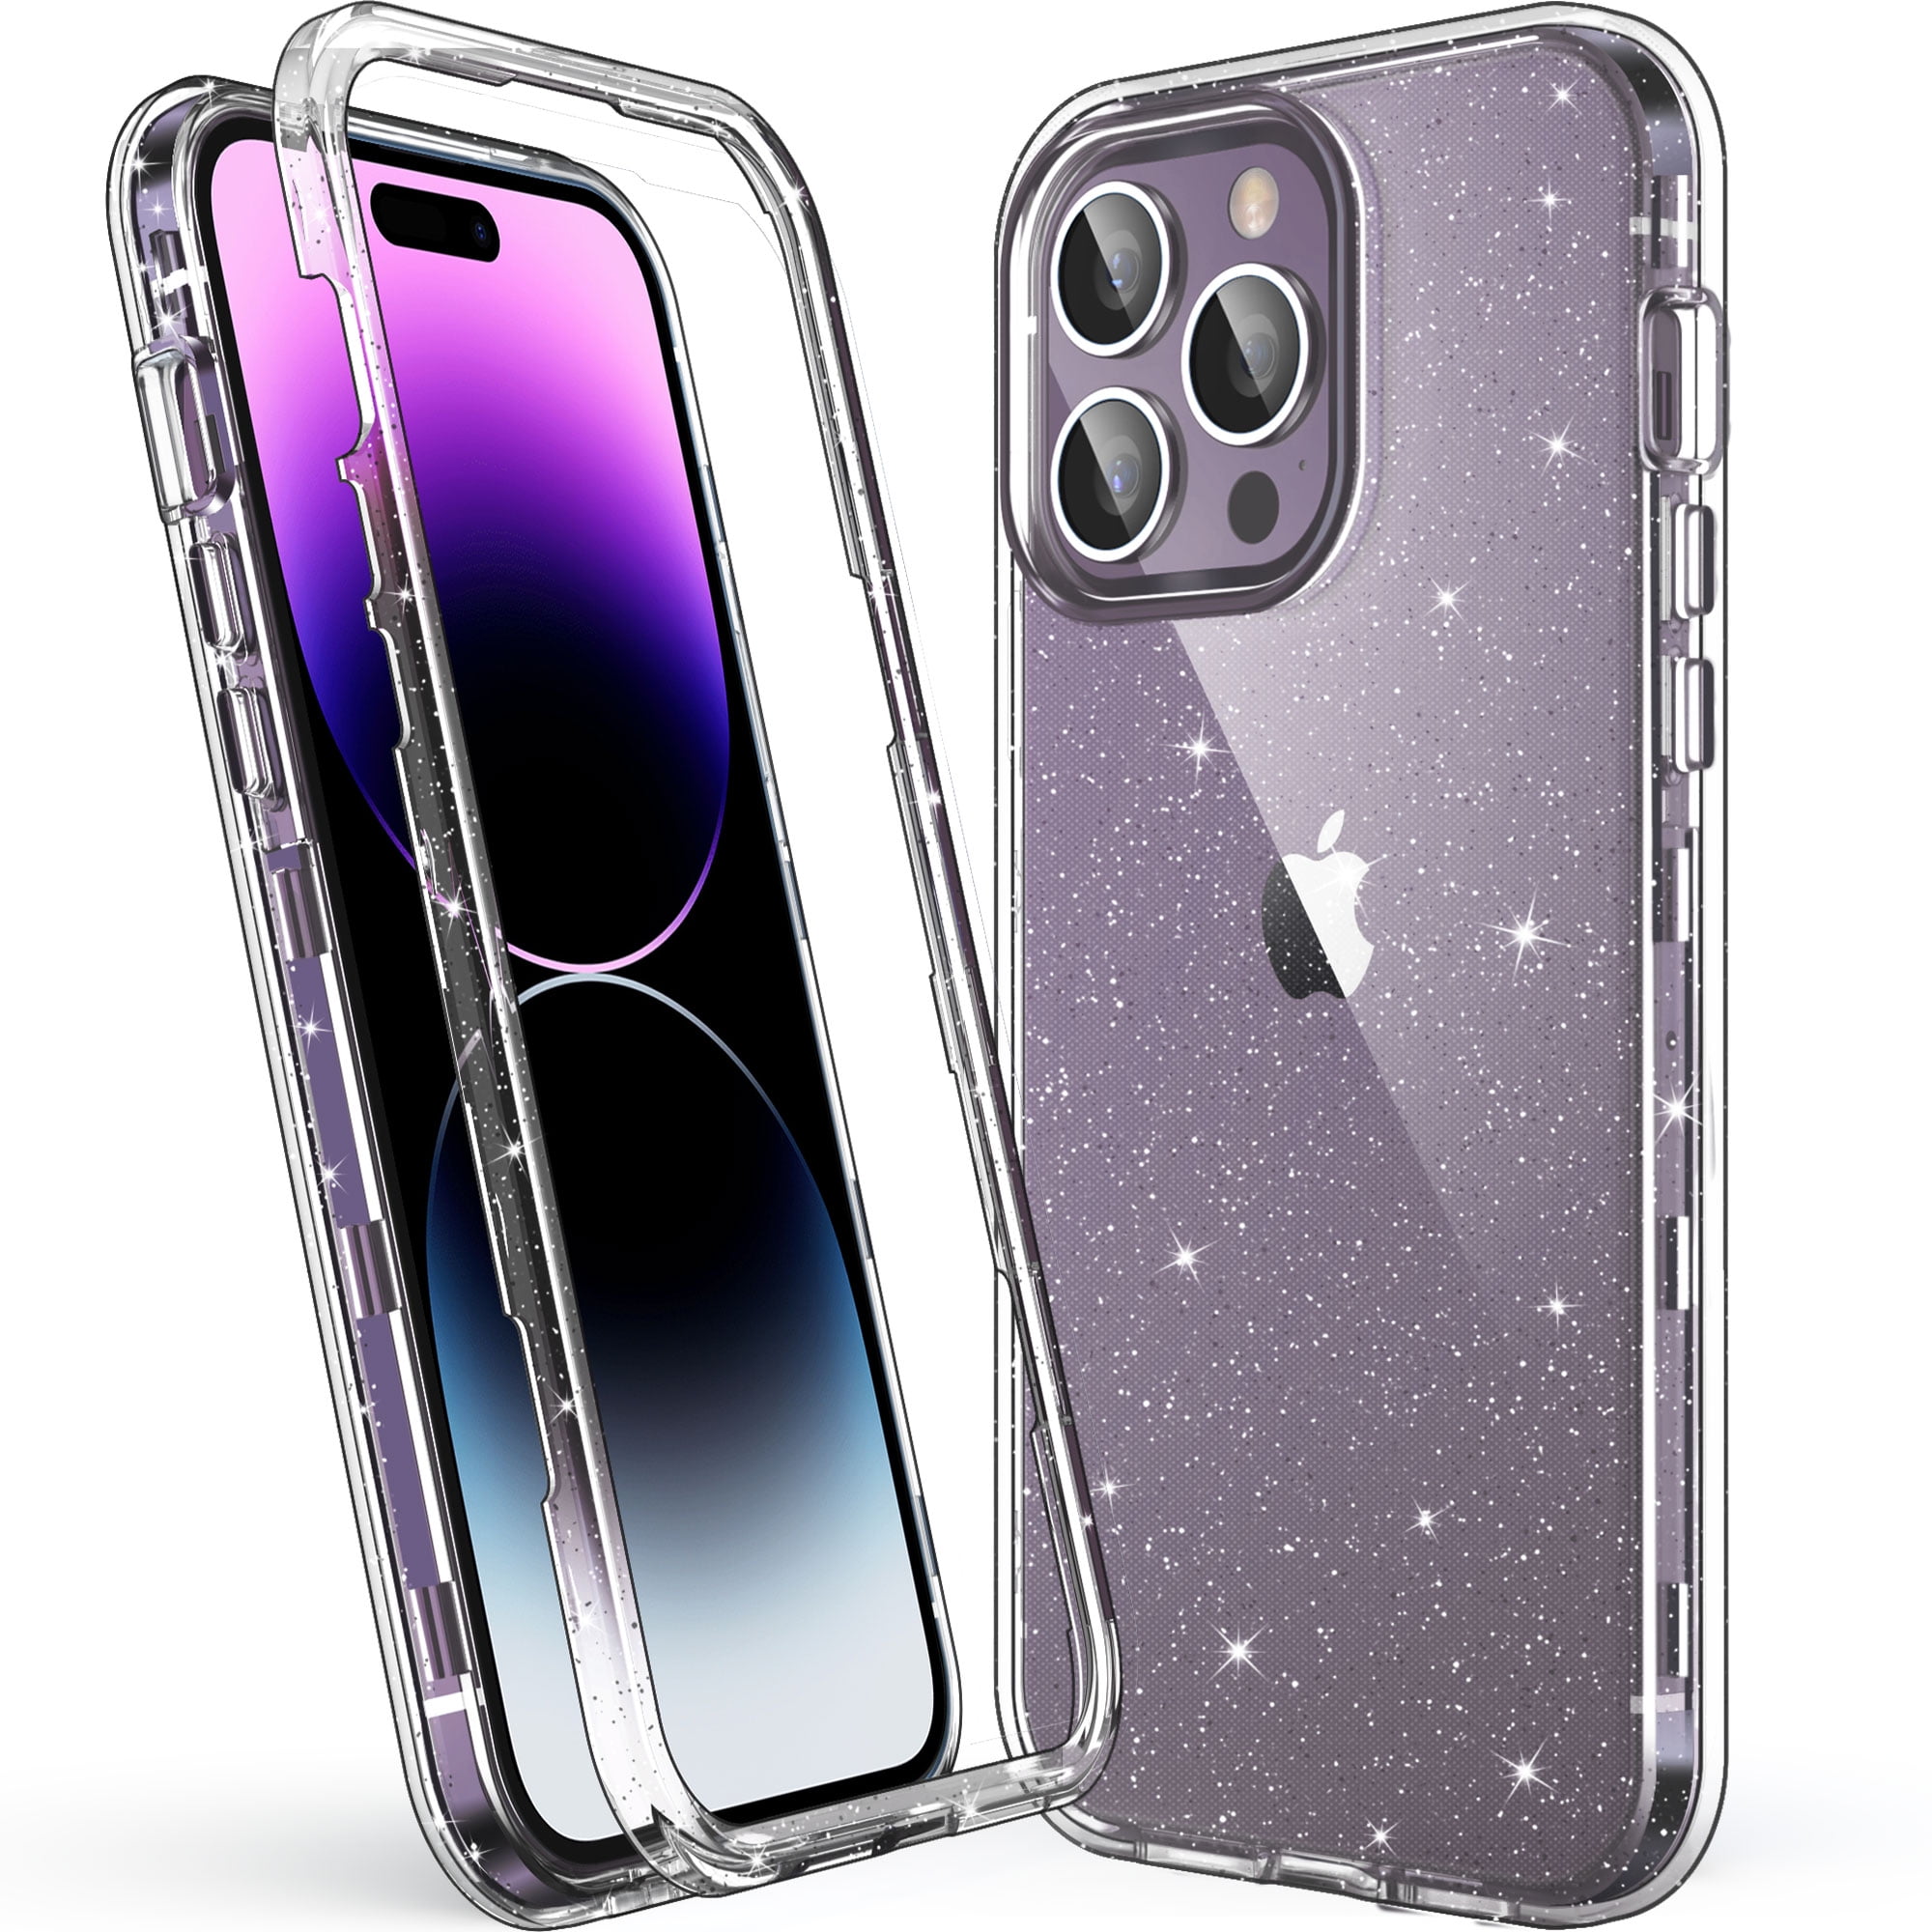  WOLLONY for iPhone 14 Clear Case Hybrid Protective Case Hard PC  Bumper Soft TPU Back Shockproof Heavy Duty Ptotection Anti-Drop Full Body  Protection Cover Clear Crystal Design for iPhone 14 6.1 